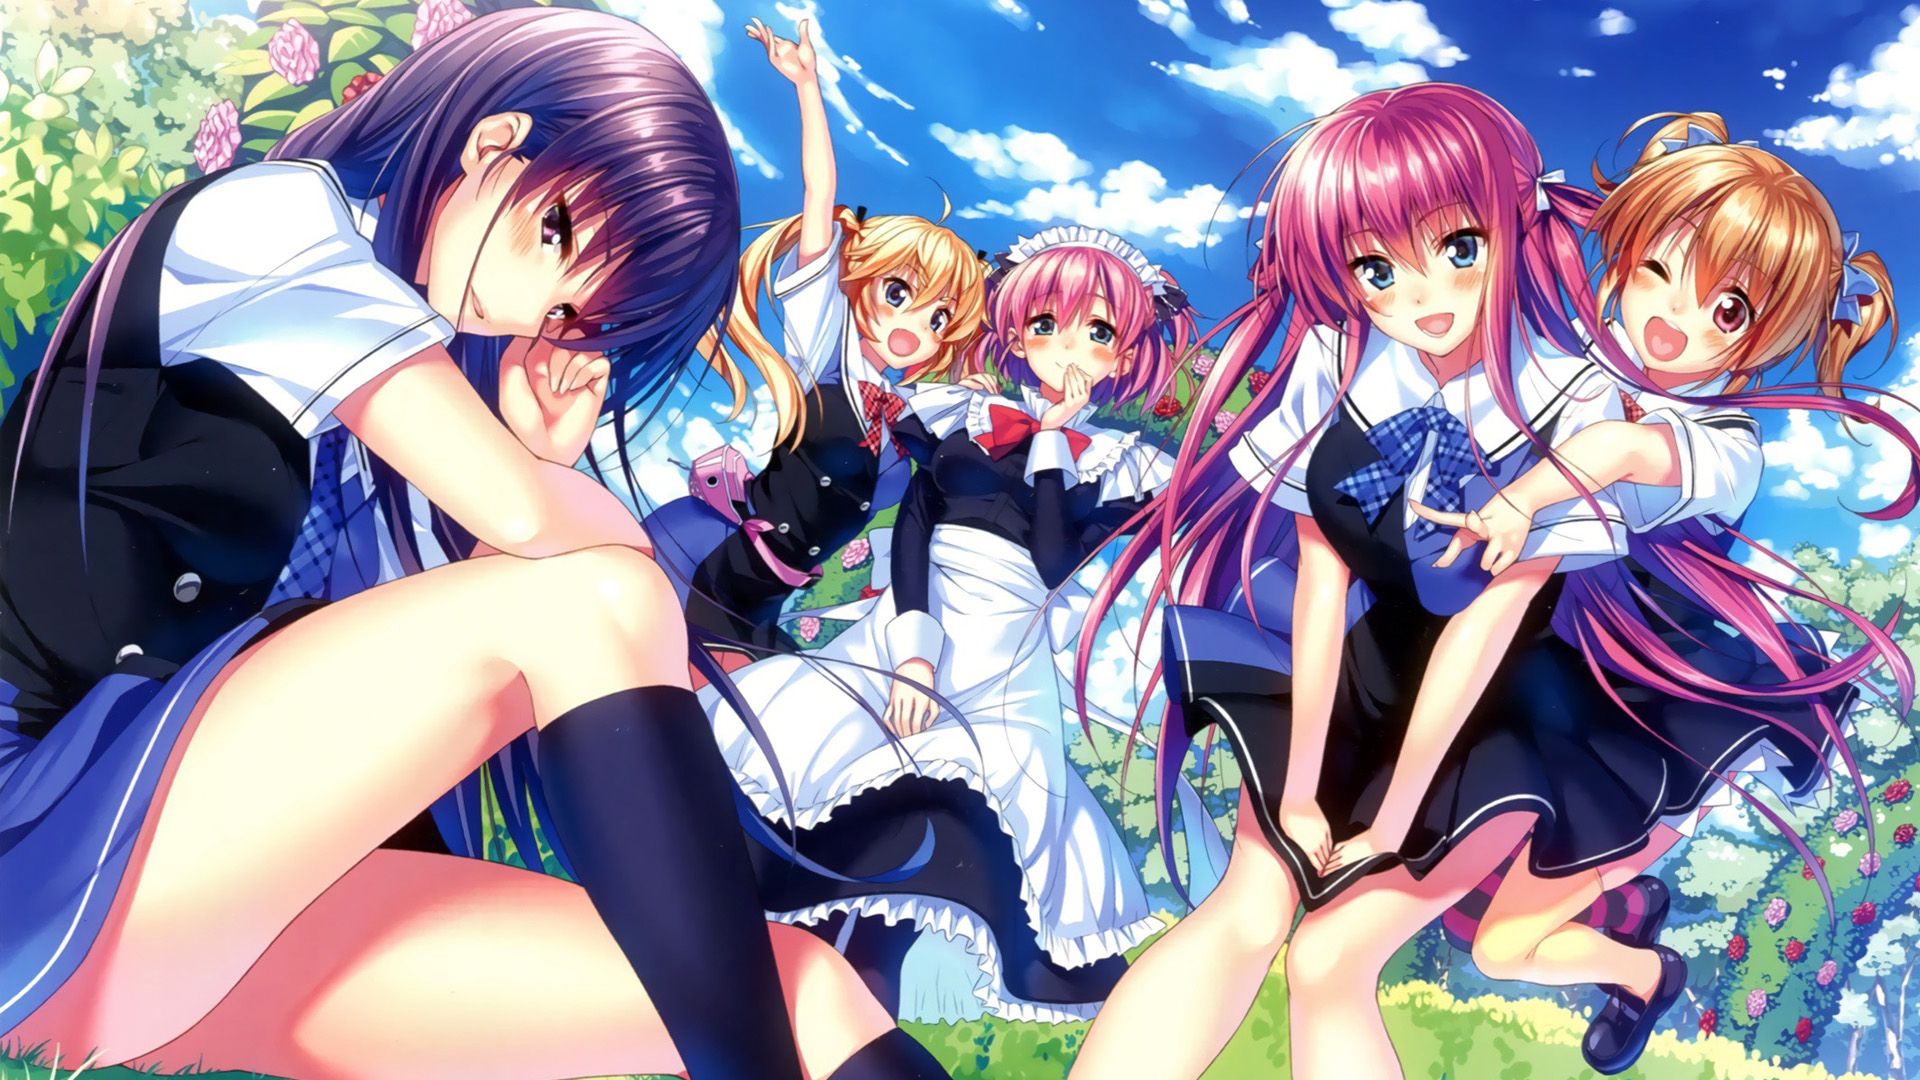 The Fruit of Grisaia background